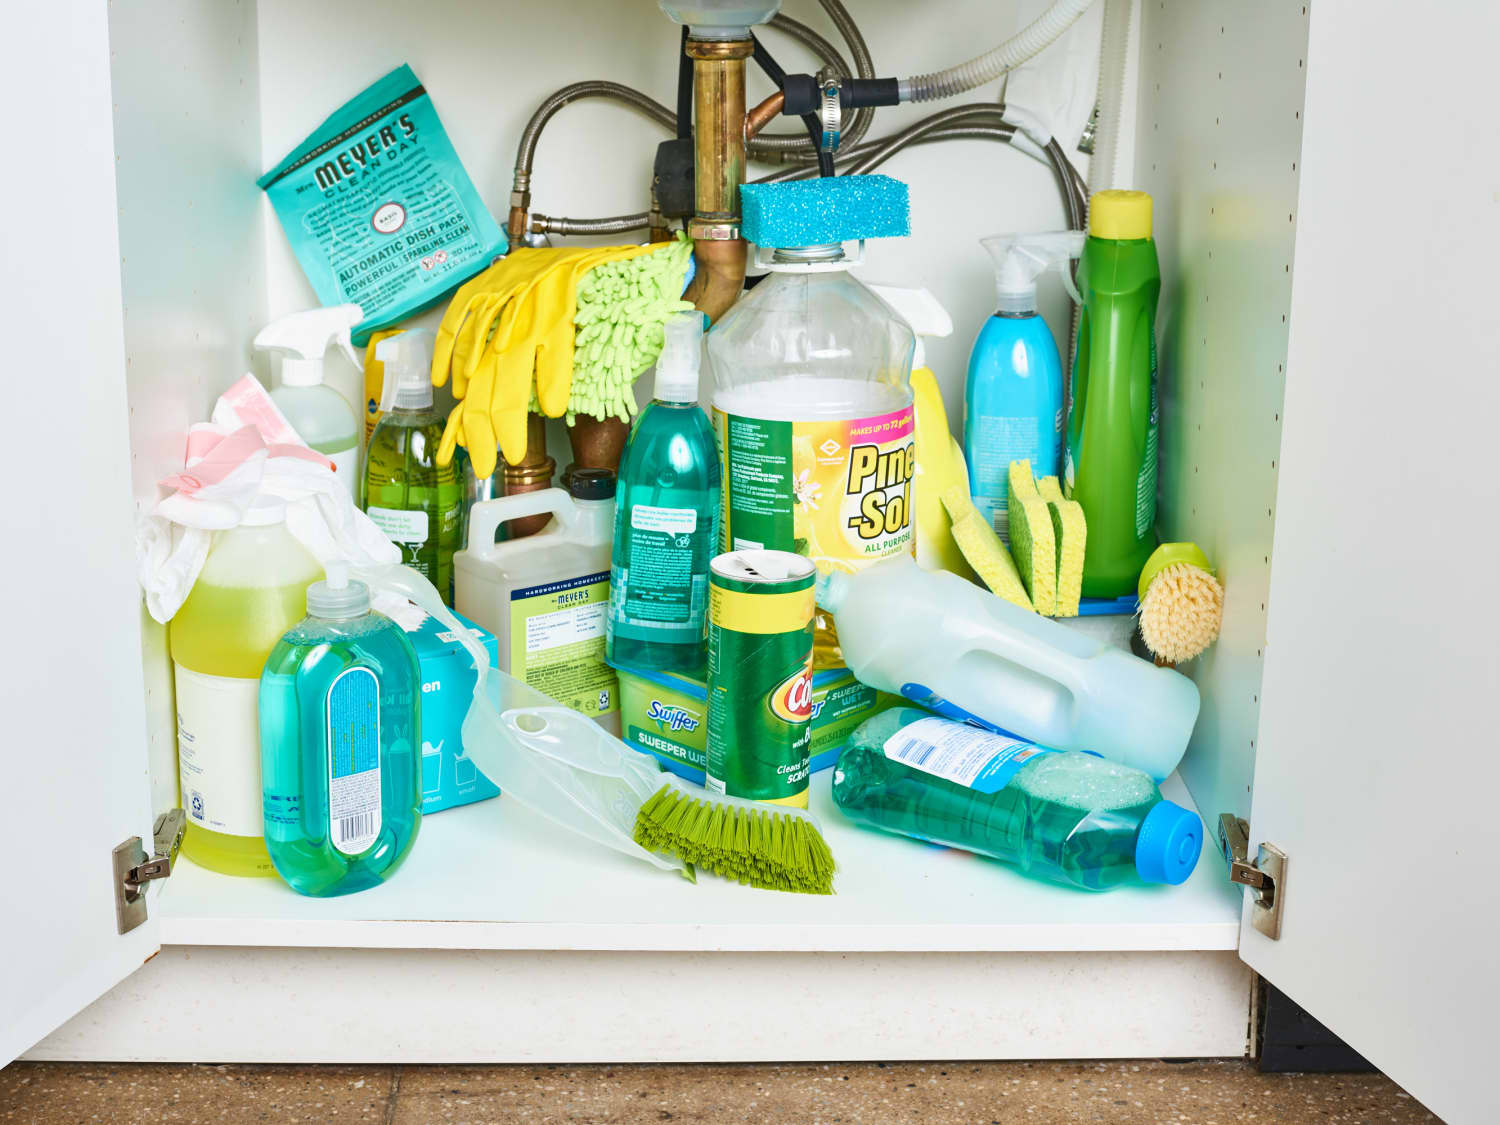 How to organize cleaning supplies: 12 expert tips